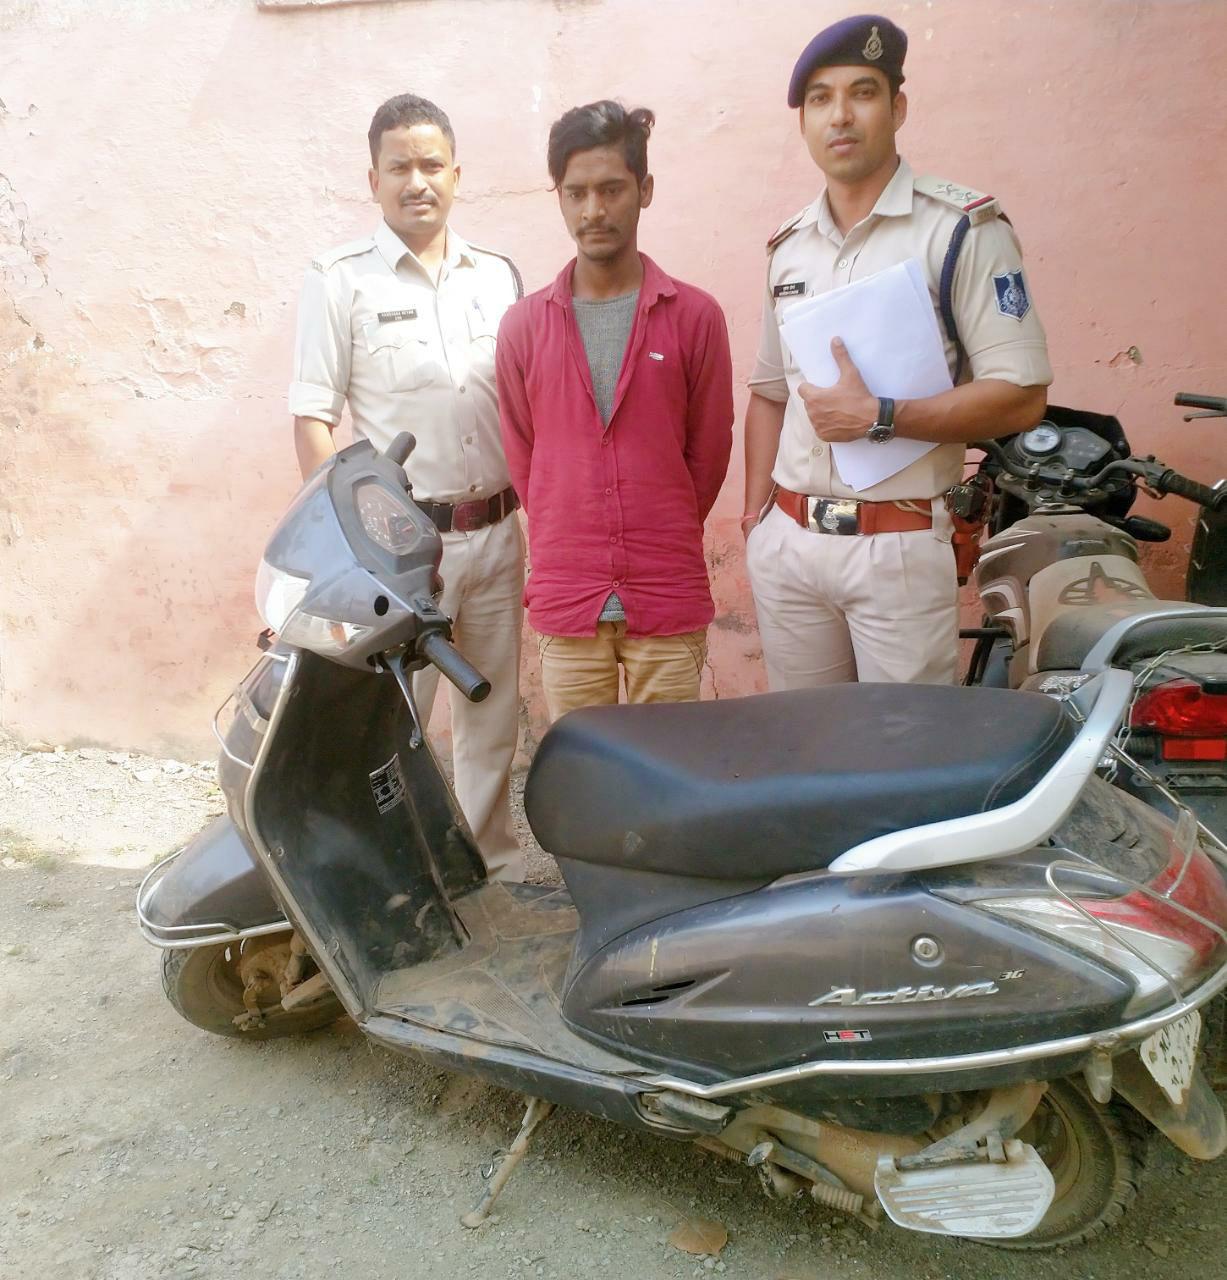 Scooter thief caught in five days